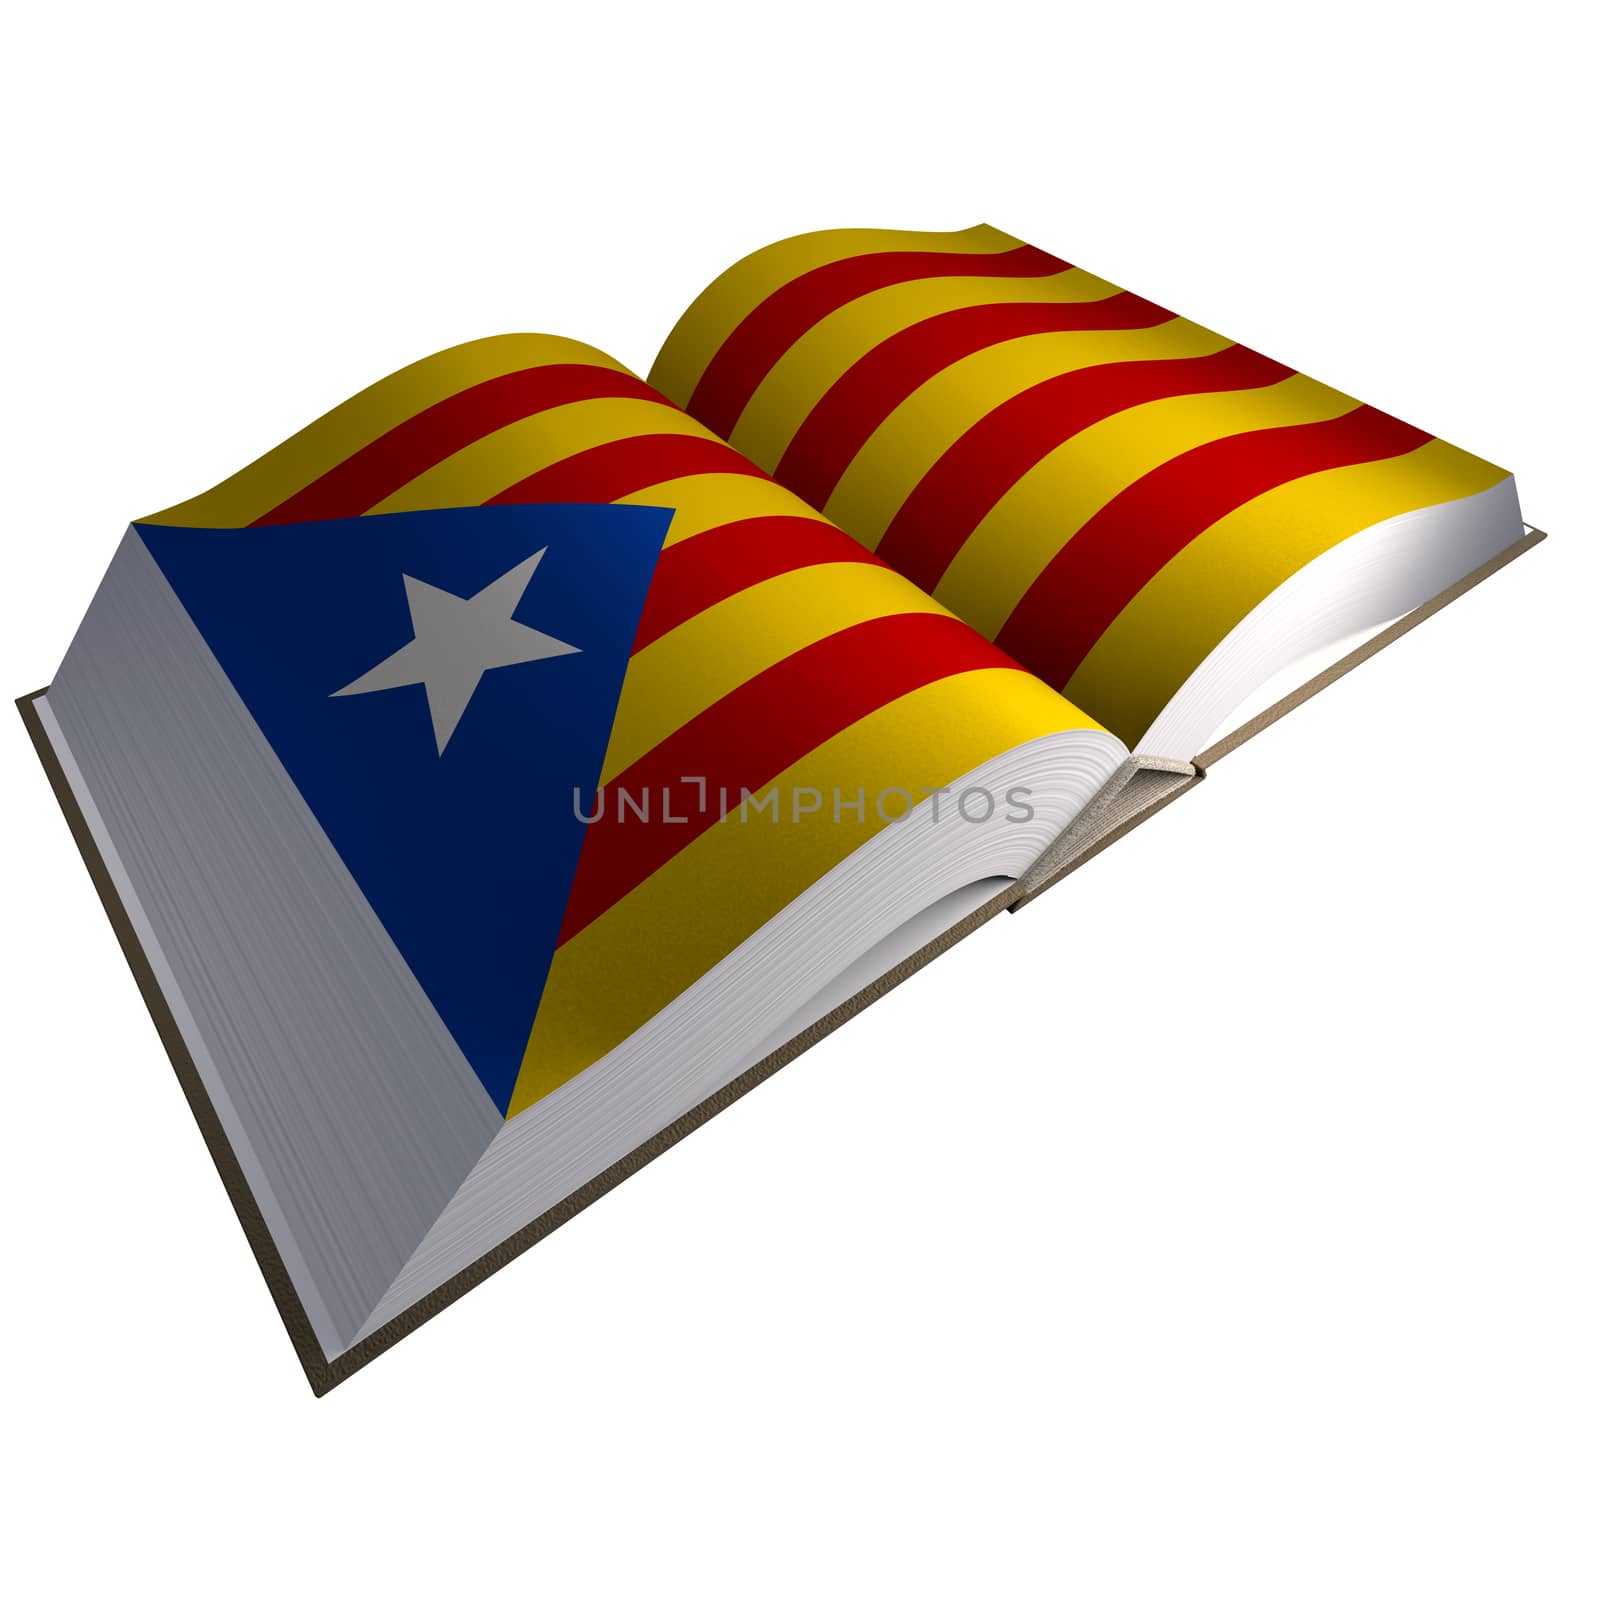 Book with Catalonian flag, 3d illustration.